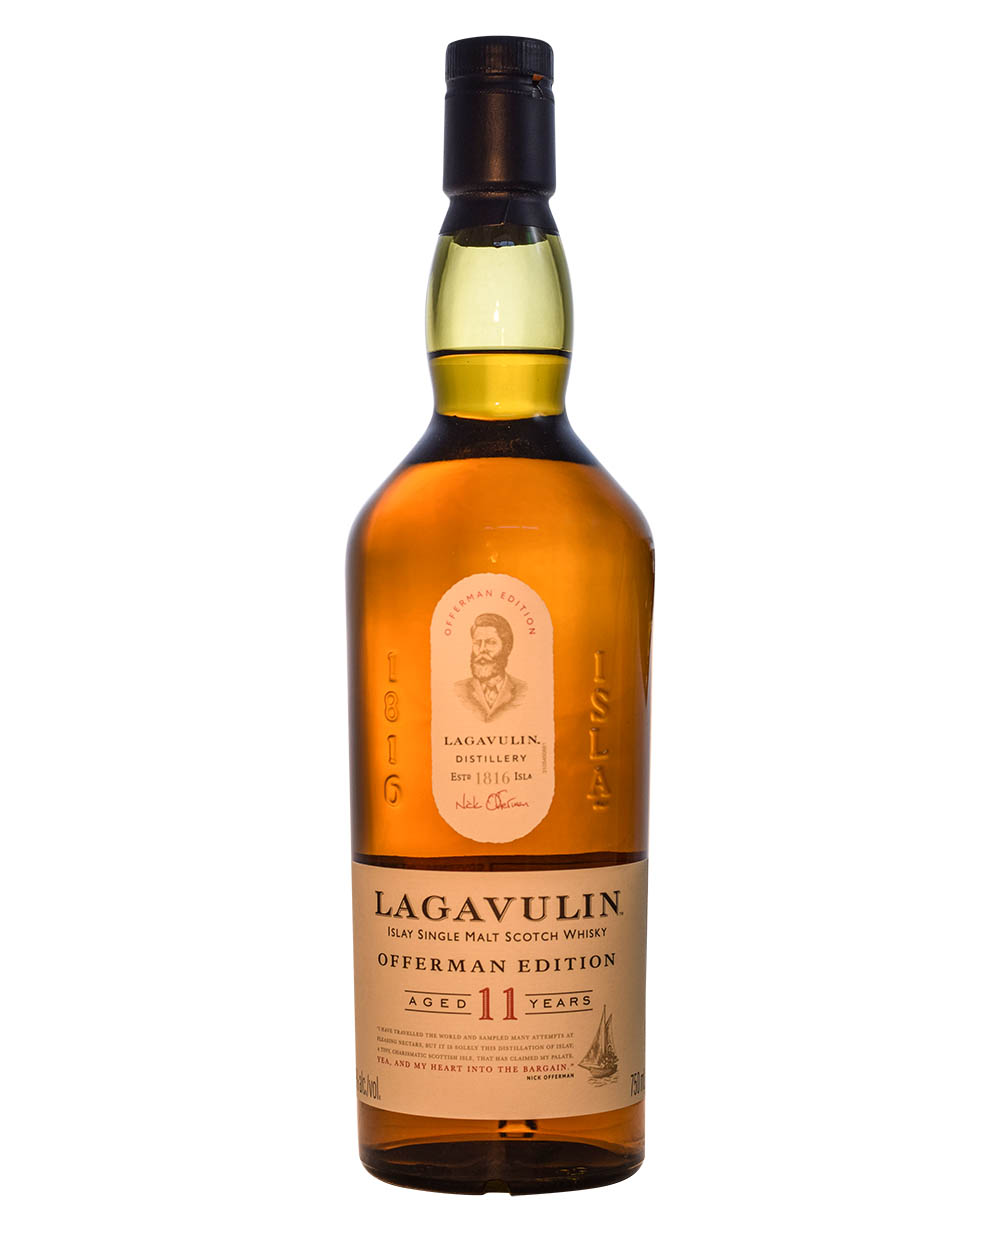 Lagavulin Offerman Edition (11 Years Old) Musthave Malts MHM